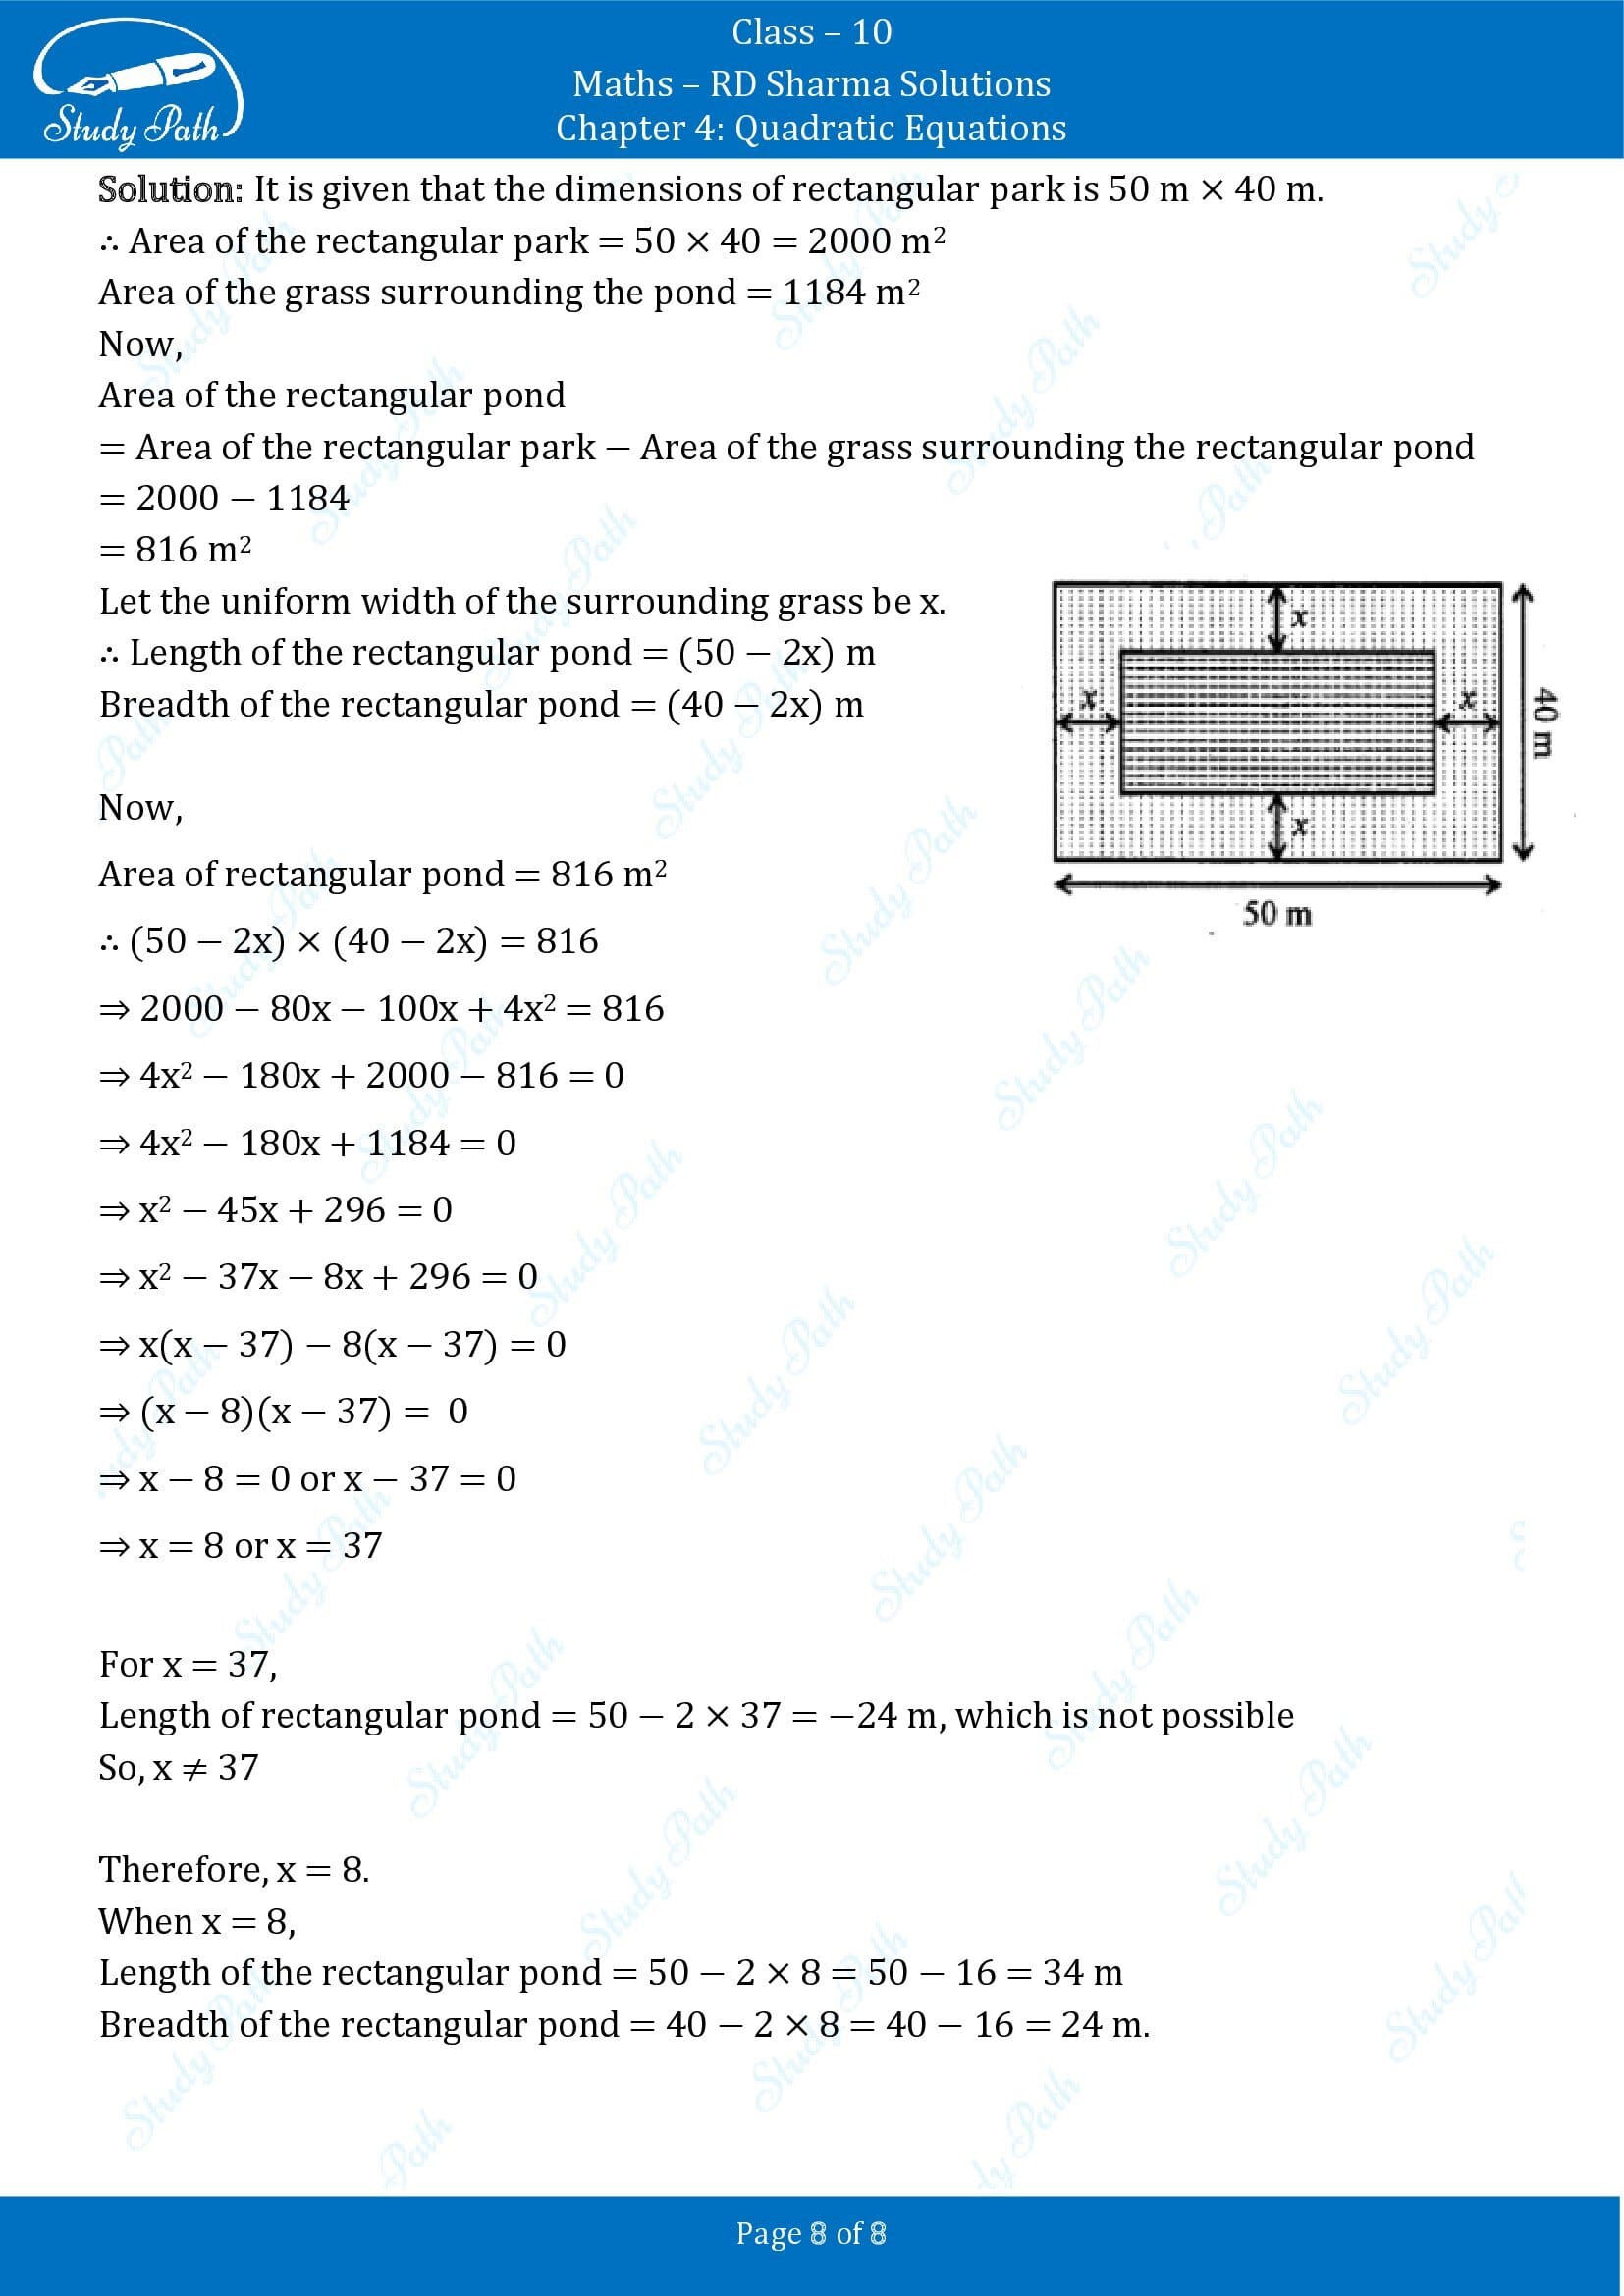 RD Sharma Solutions Class 10 Chapter 4 Quadratic Equations Exercise 4.11 00008